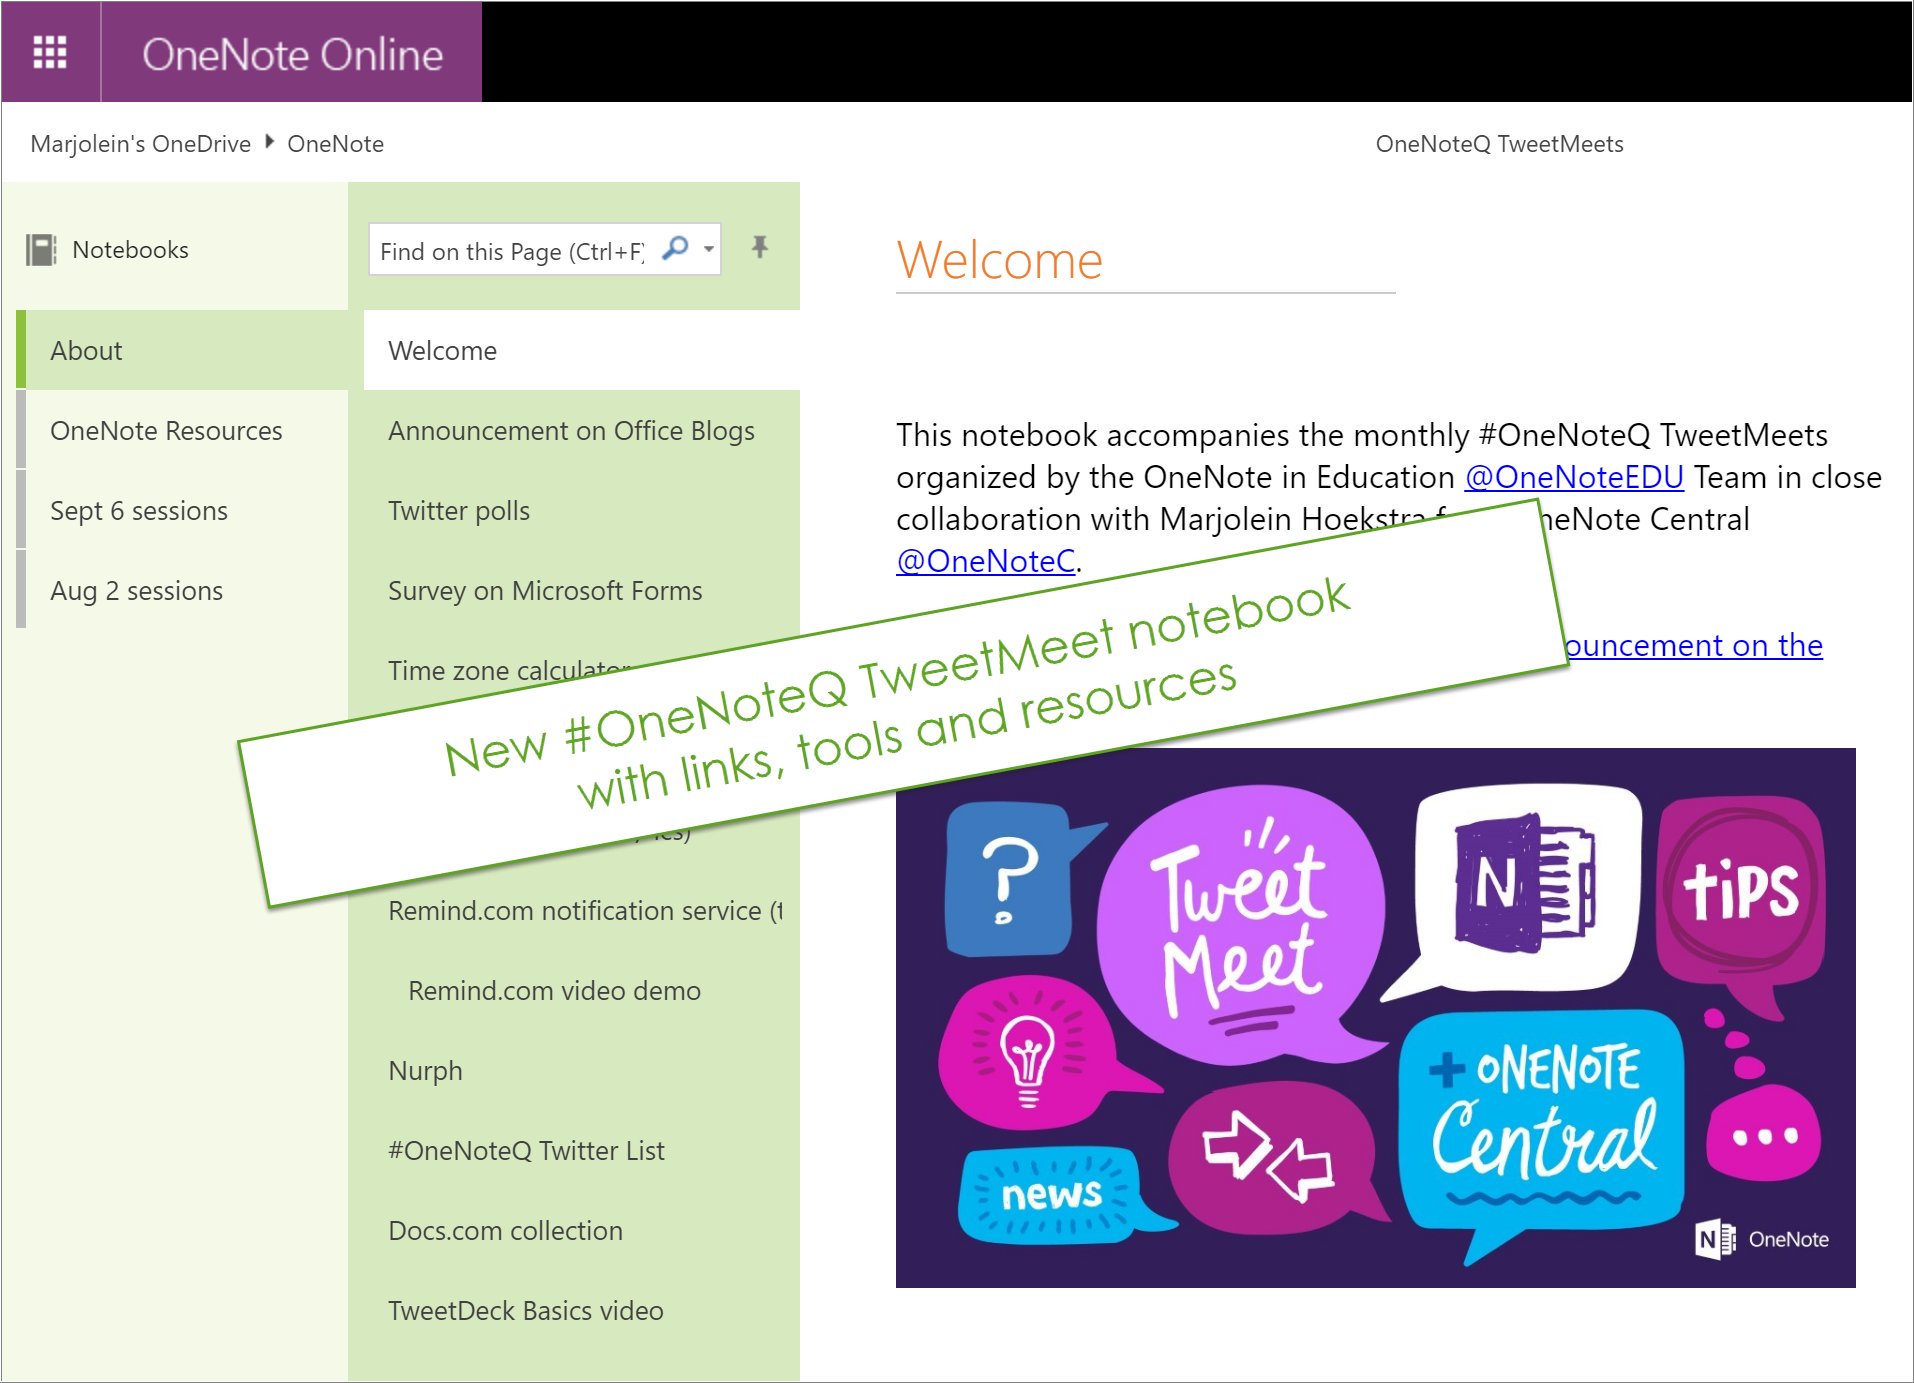 New: all #OneNoteQ TweetMeet links, tools and resources as a #OneNote notebook https://t.co/SSmIgvJrH8
by @OneNoteC https://t.co/lLxnM6DbEa